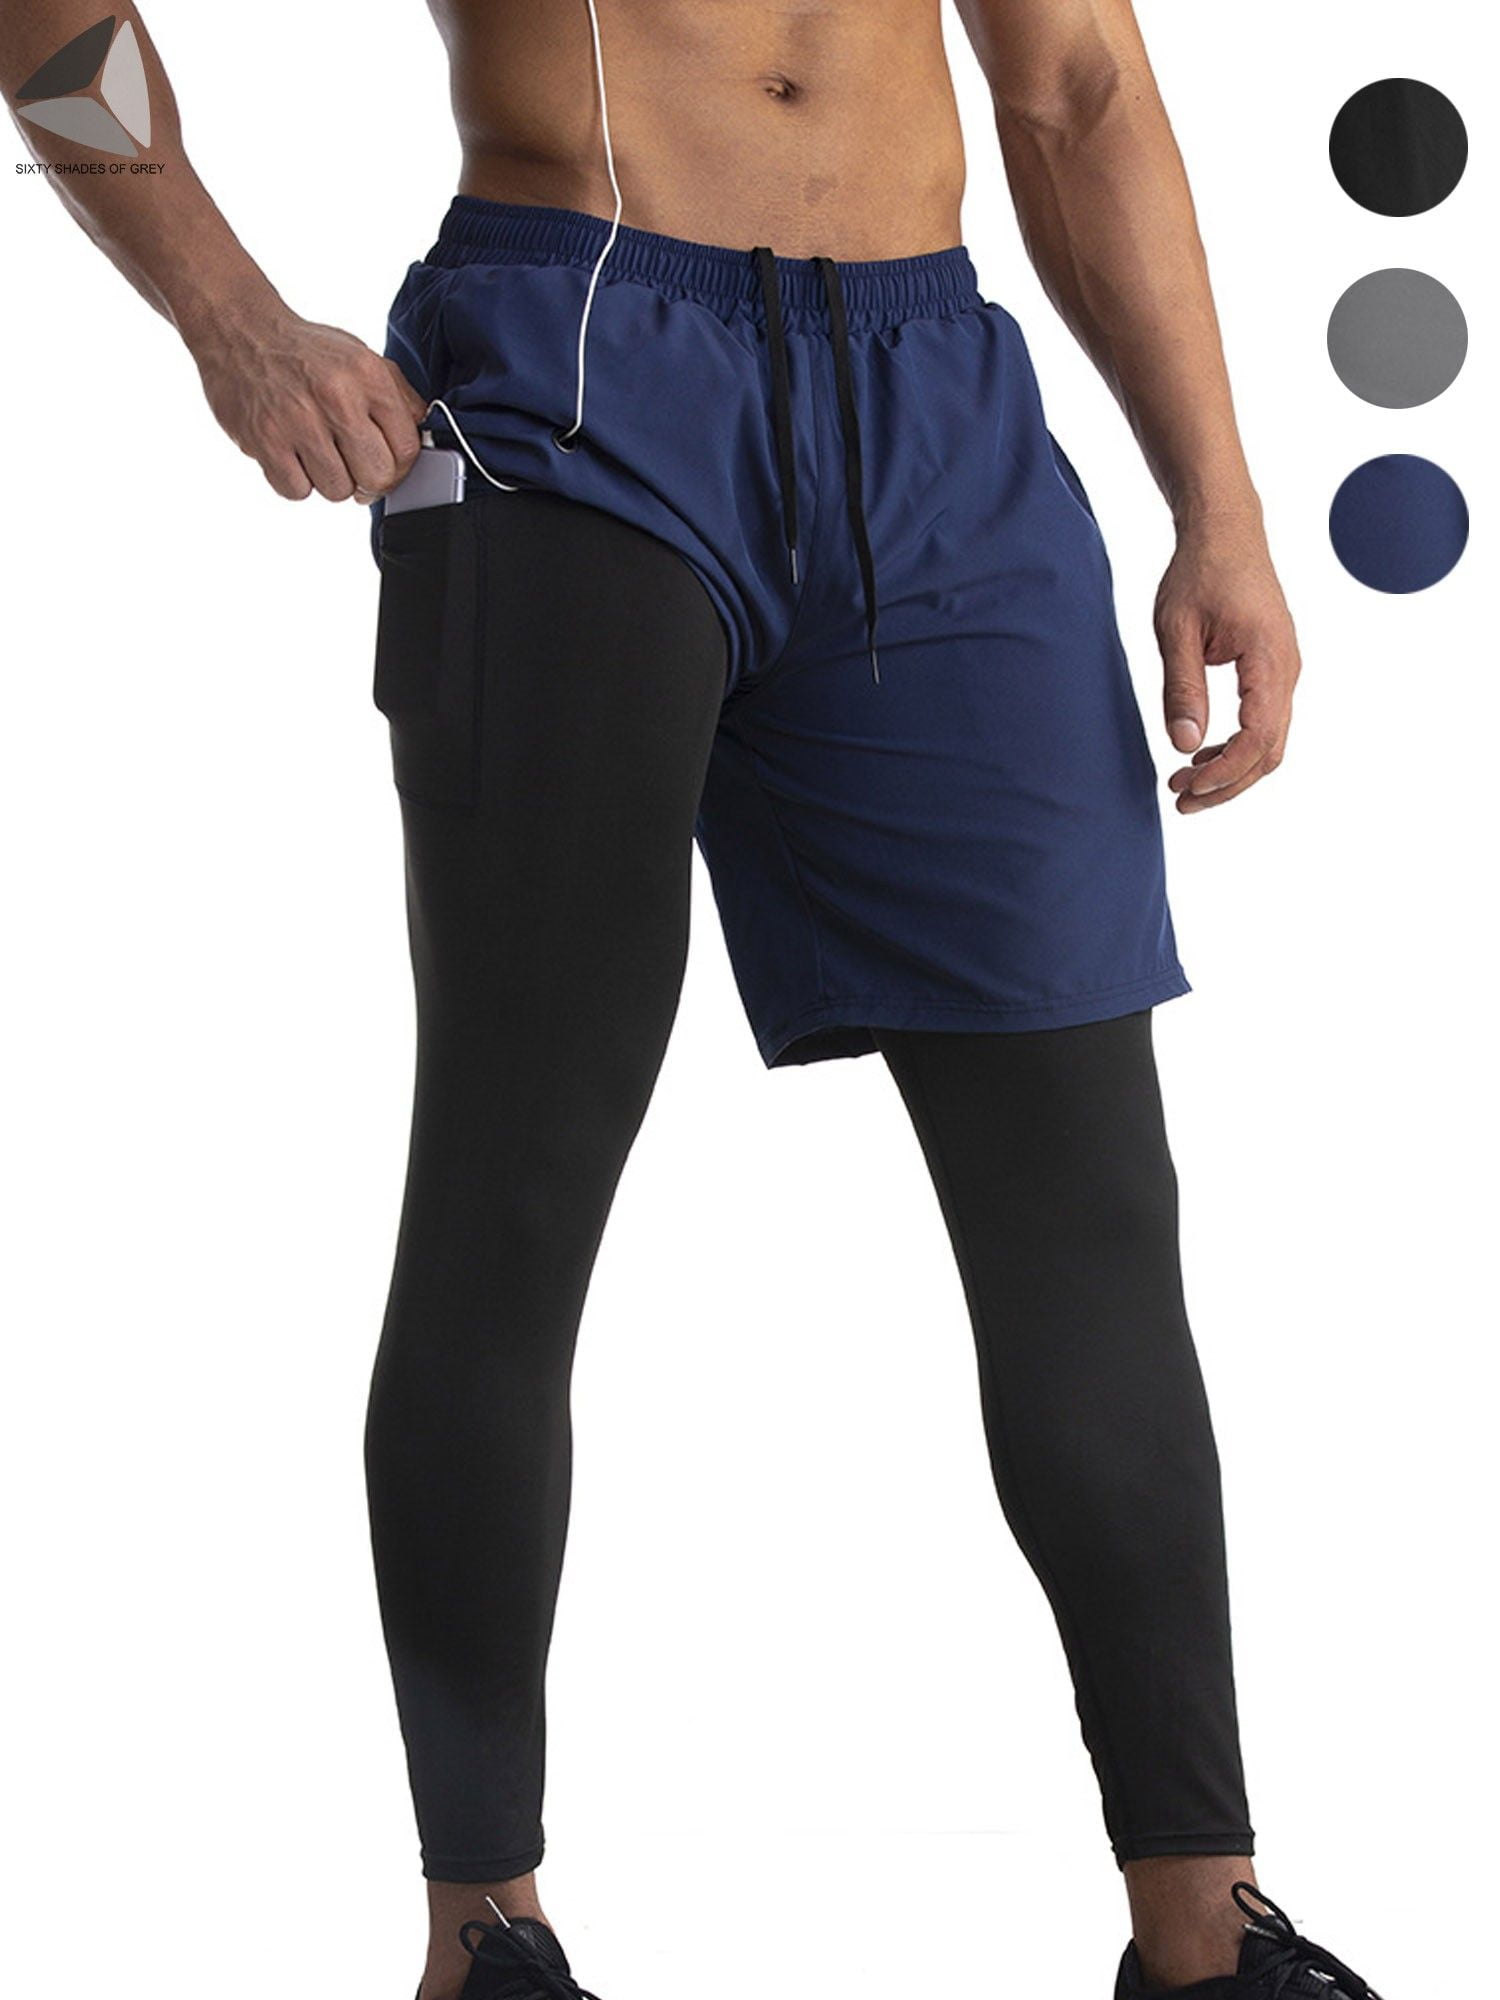 POWER SHORTS BE ONE Leggings with detachable shorts running set - Men -  Diadora Online Store ID